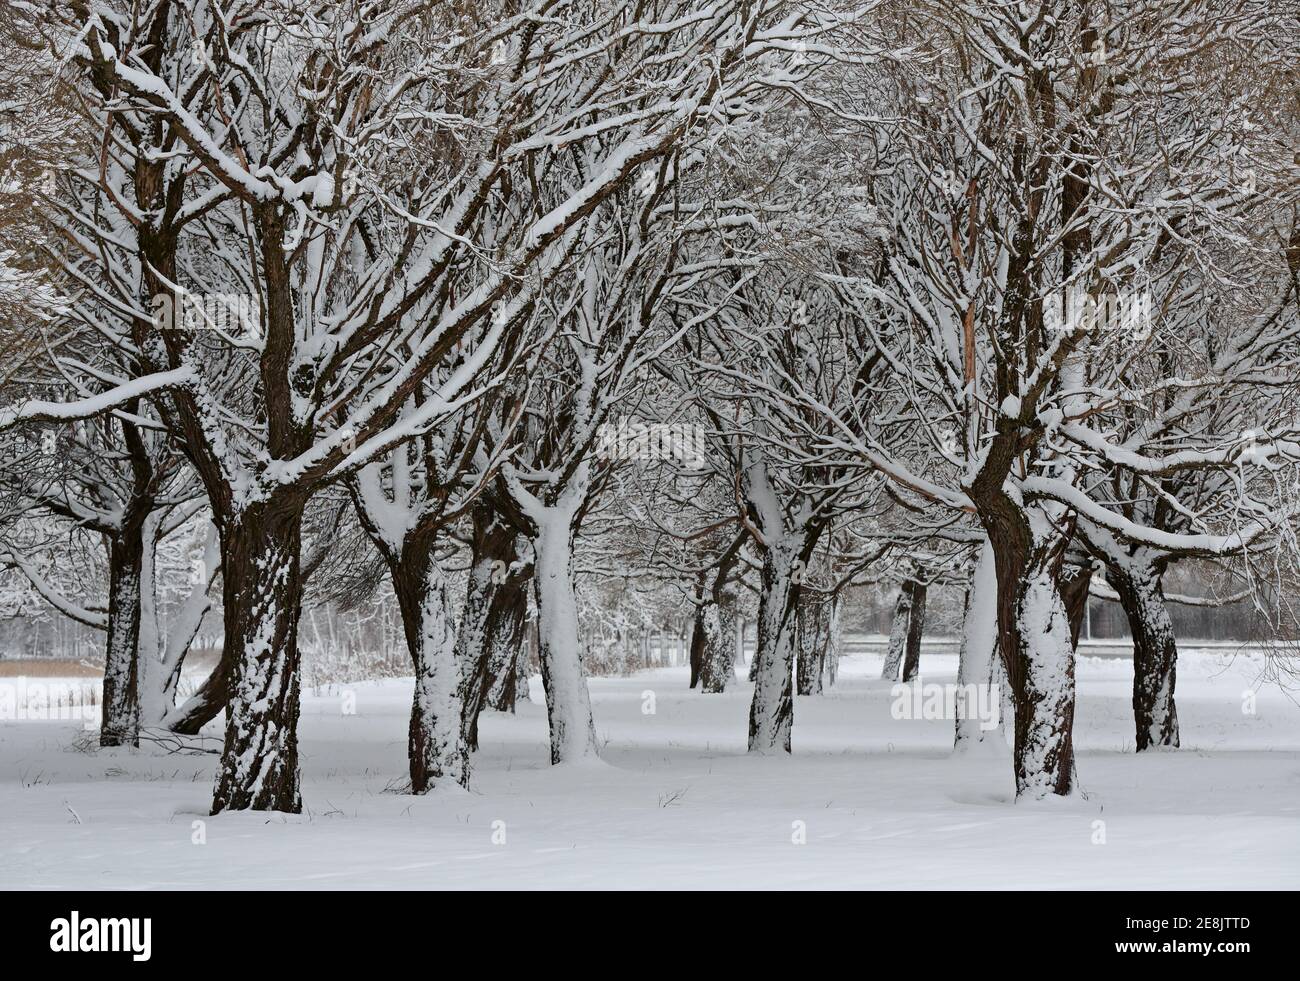 Frozen willow trees with snowy tree trunks in a wintry landscape Stock Photo